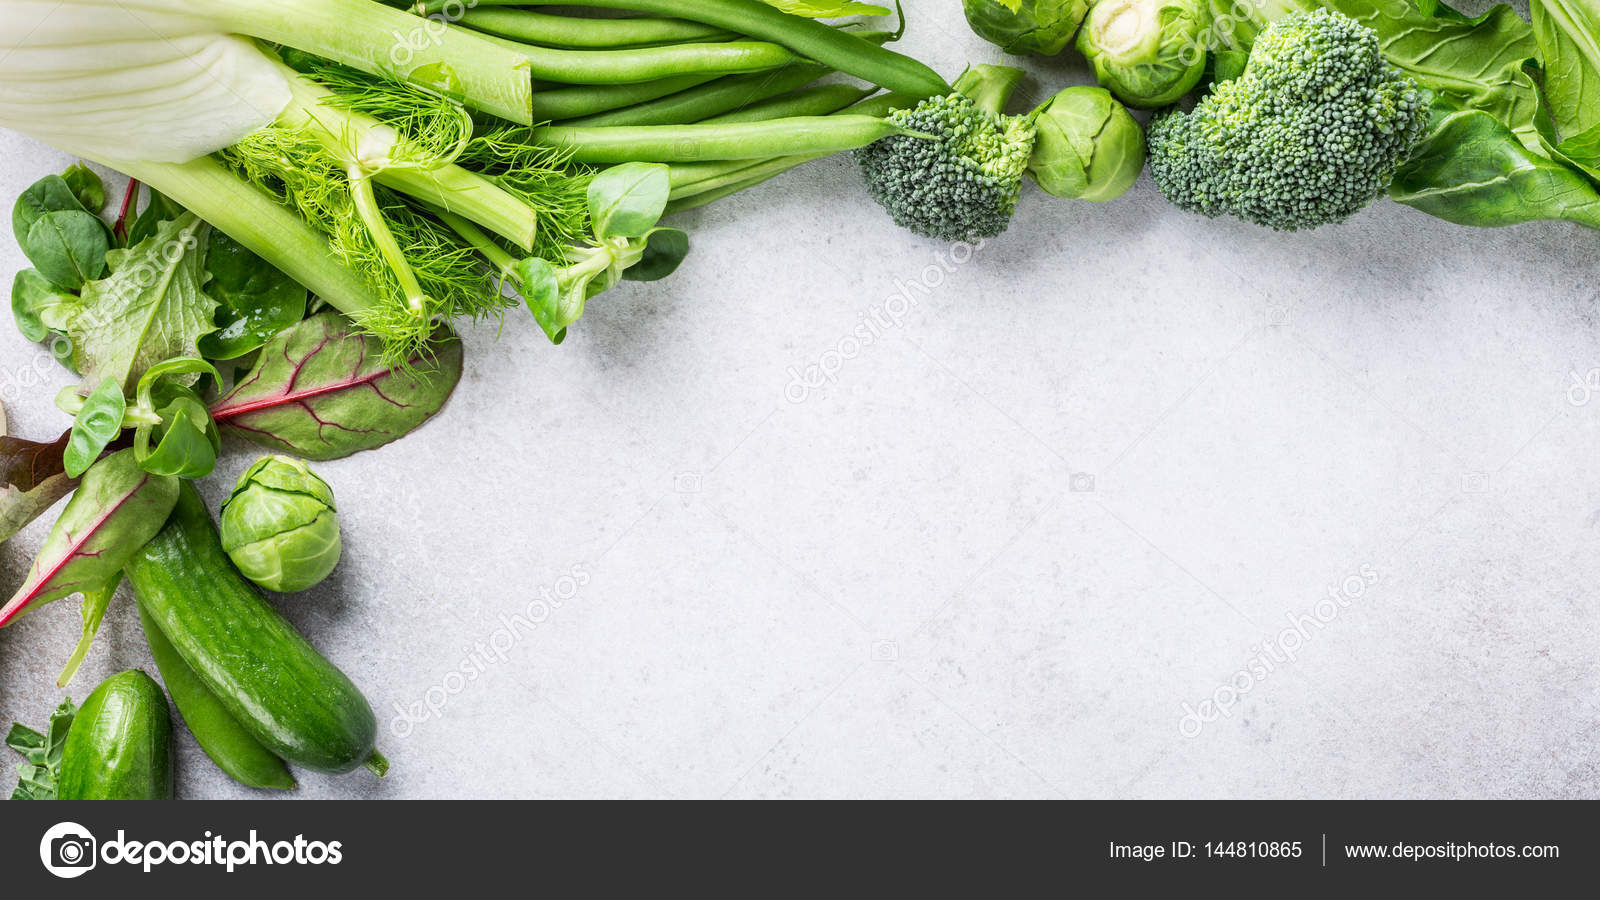 Background with assorted green vegetables Stock Photo by ©IMelnyk 144810865